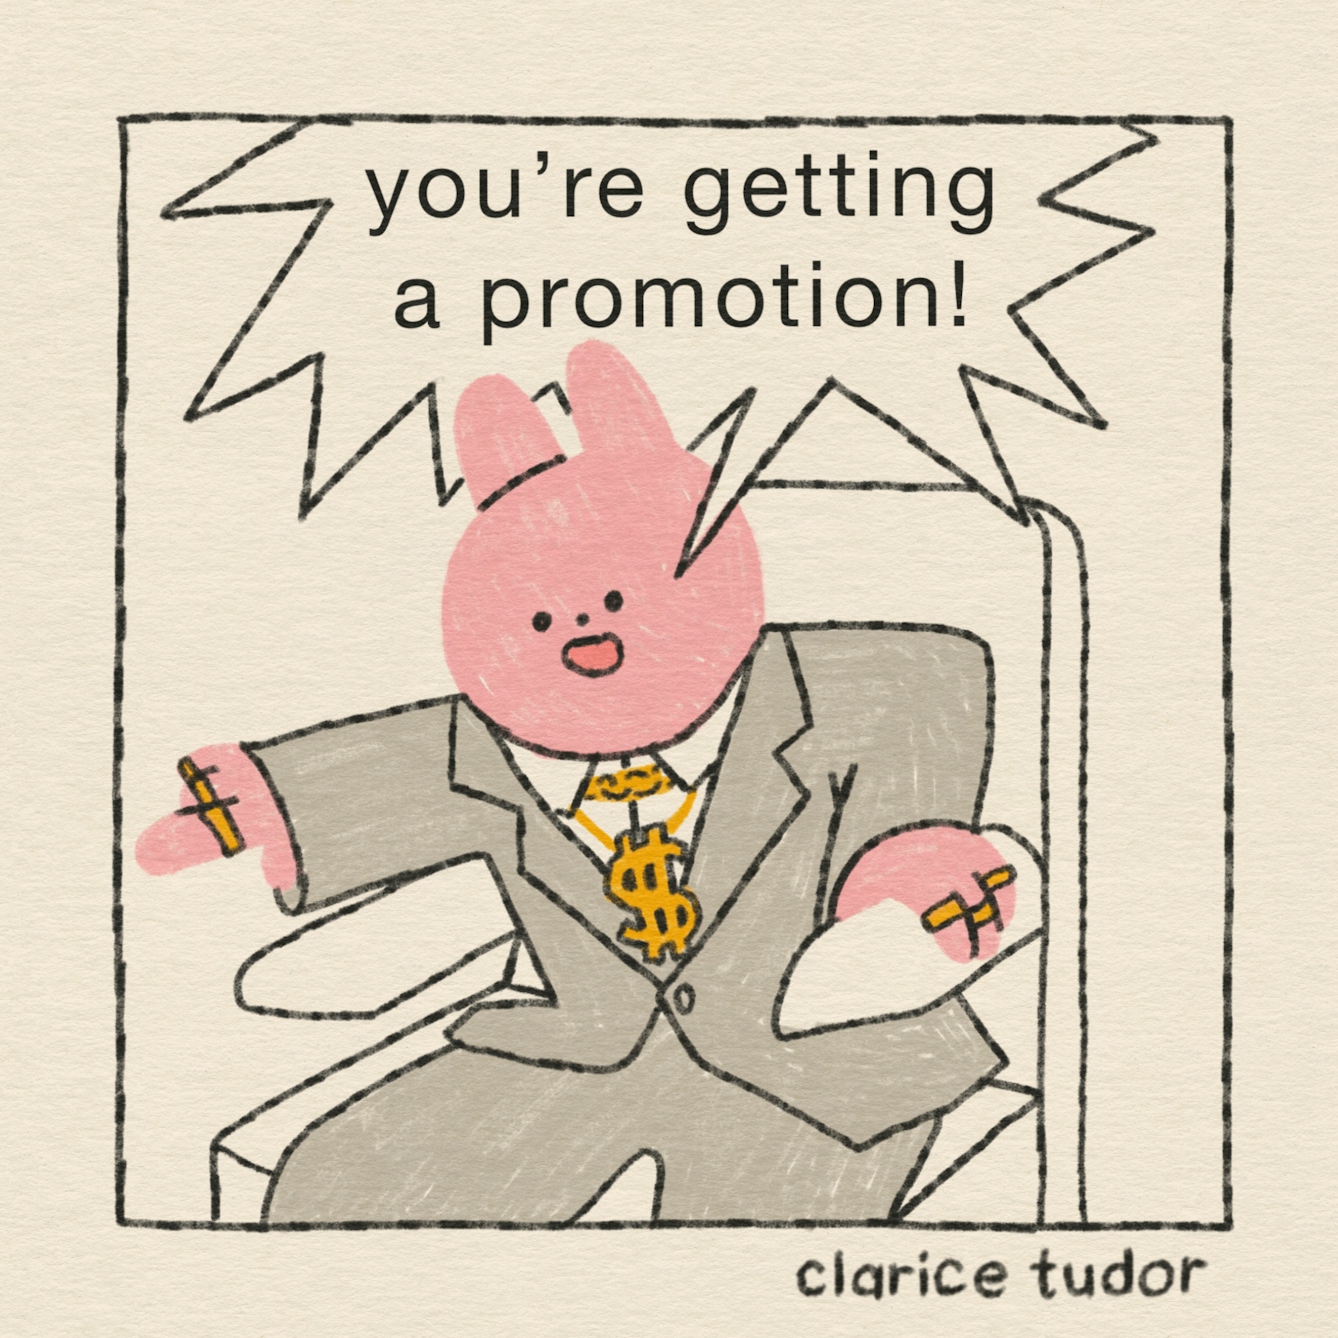 Panel 4 of 4: “You’re getting a promotion!’, shouts the CEO from his office chair, with a big smile on his face. 